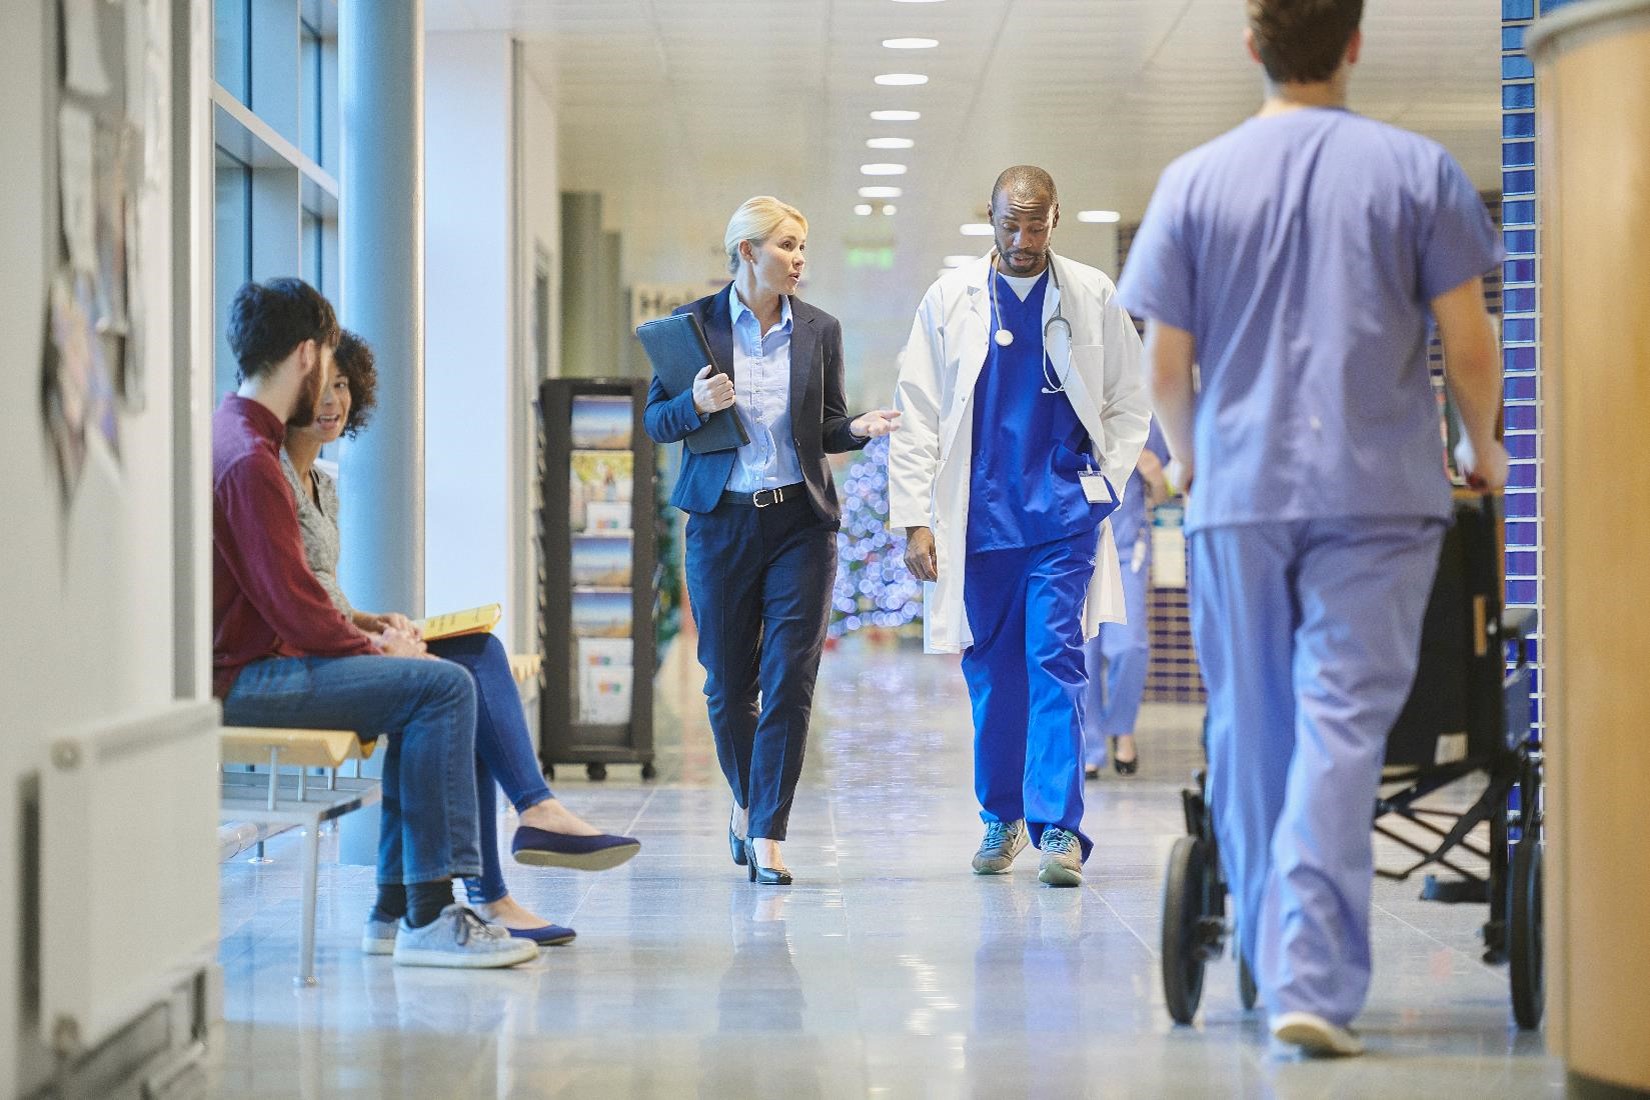 A doctor wearing scrubs and a white coat walks down a hospital hallway chatting with a hospital administrator while other staff, patients, and visitors are visible in the background.